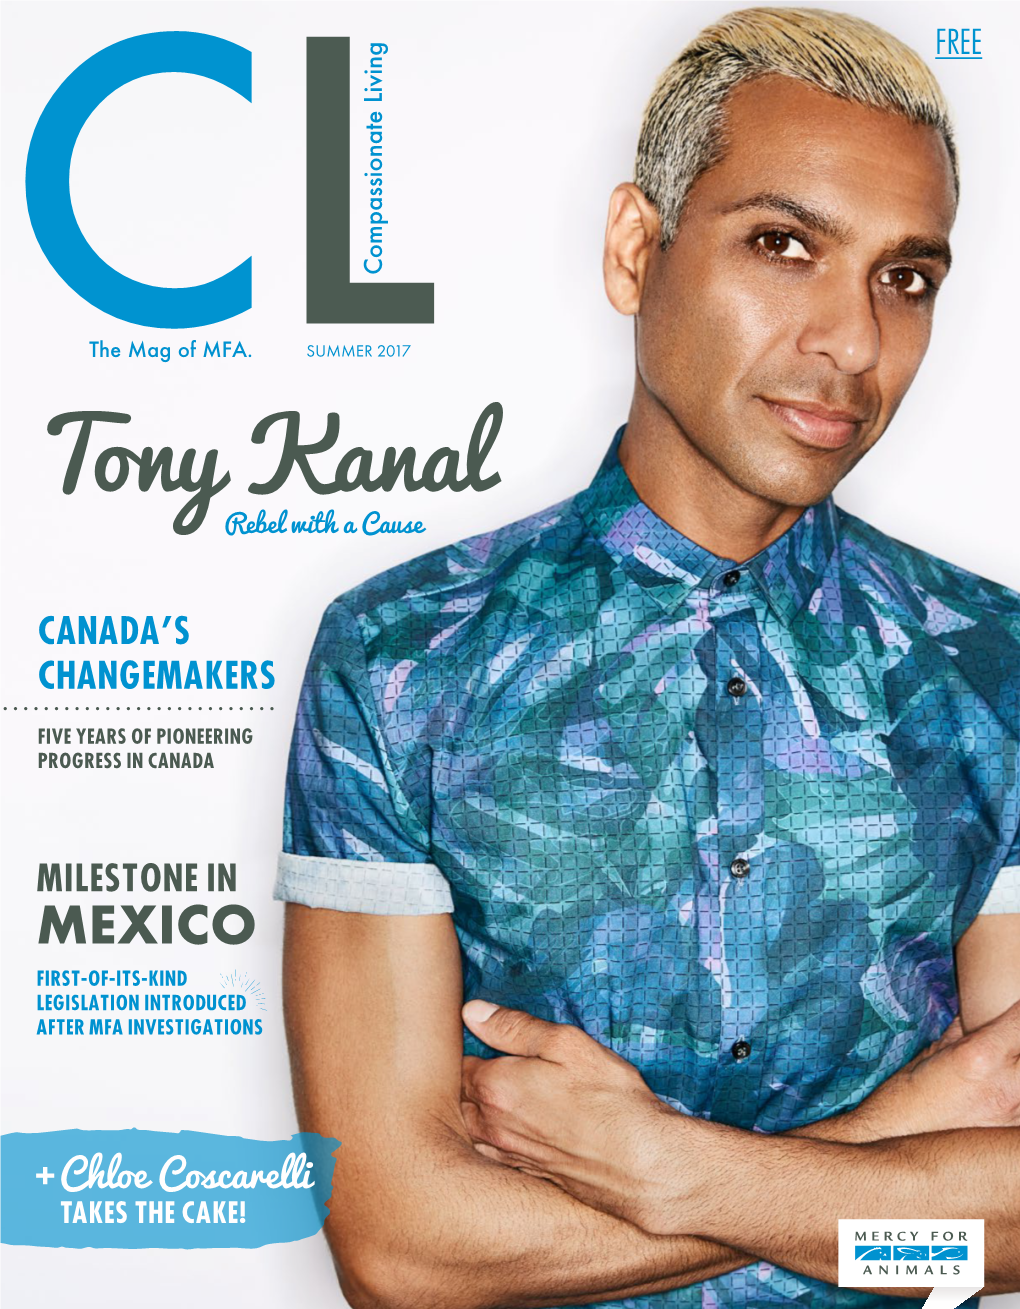 Tony Kanal Rebel with a Cause